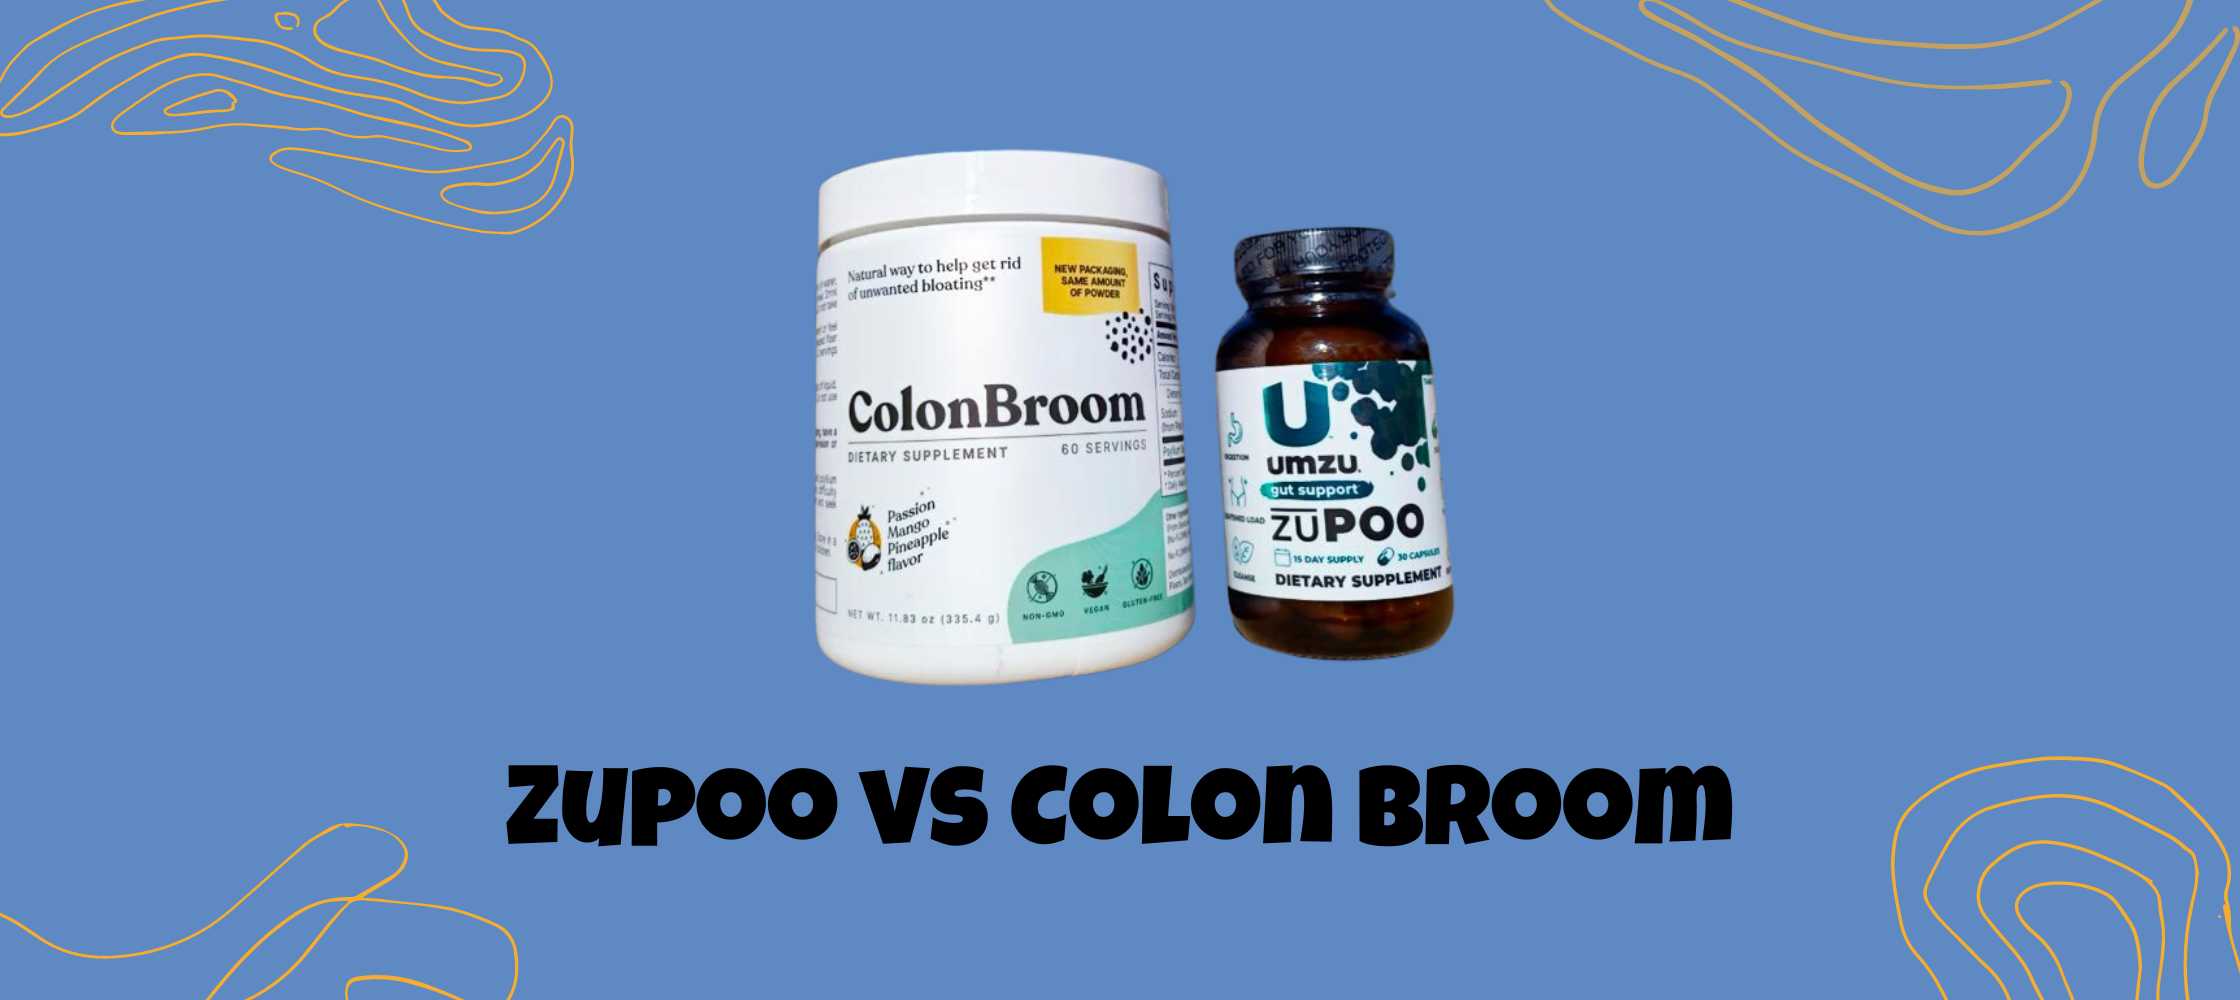 Zupoo and Colon Broom